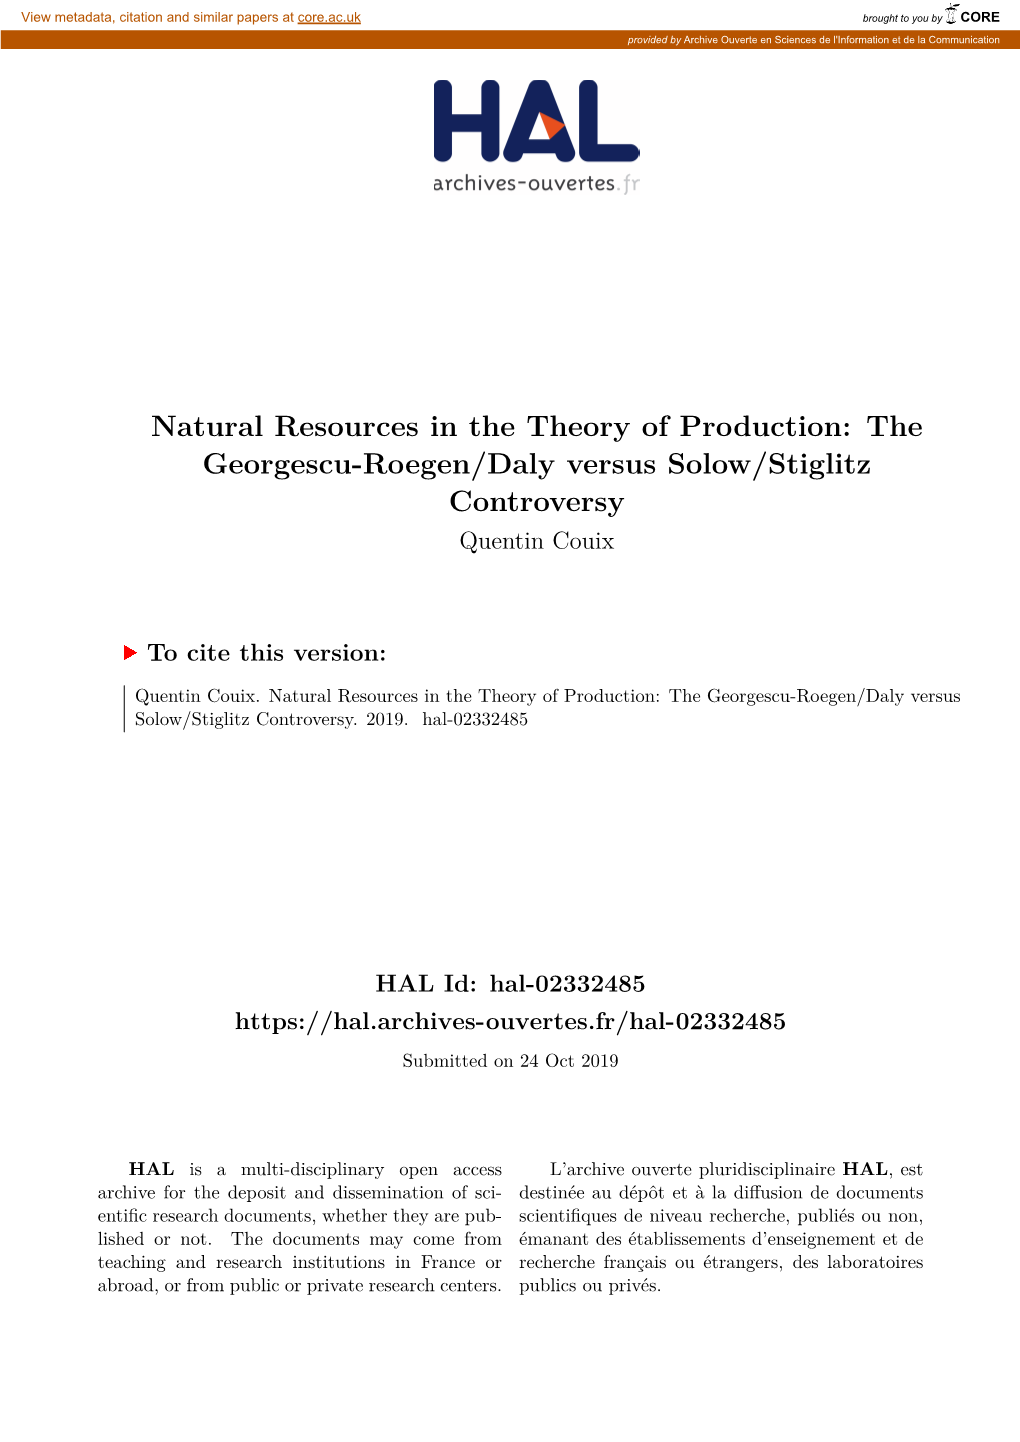 Natural Resources in the Theory of Production: the Georgescu-Roegen/Daly Versus Solow/Stiglitz Controversy Quentin Couix